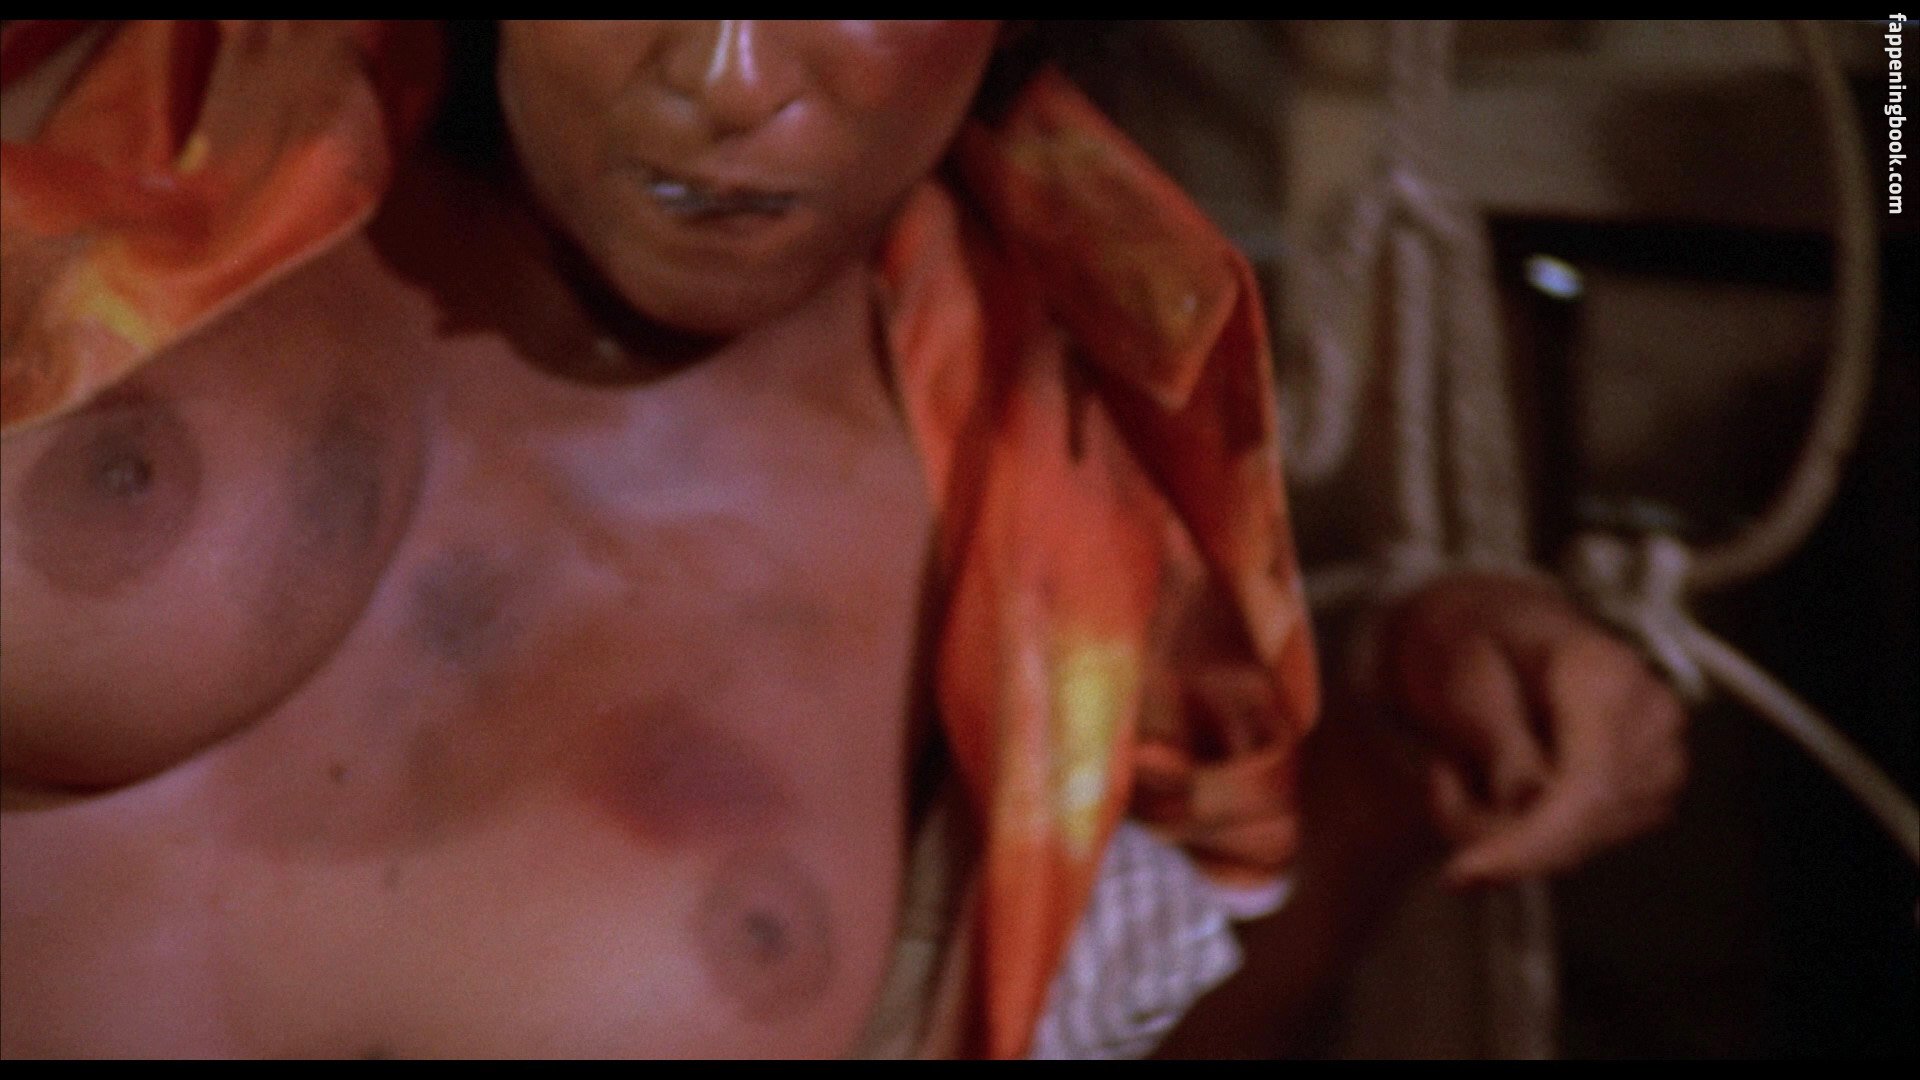 Pam grier nude movies.